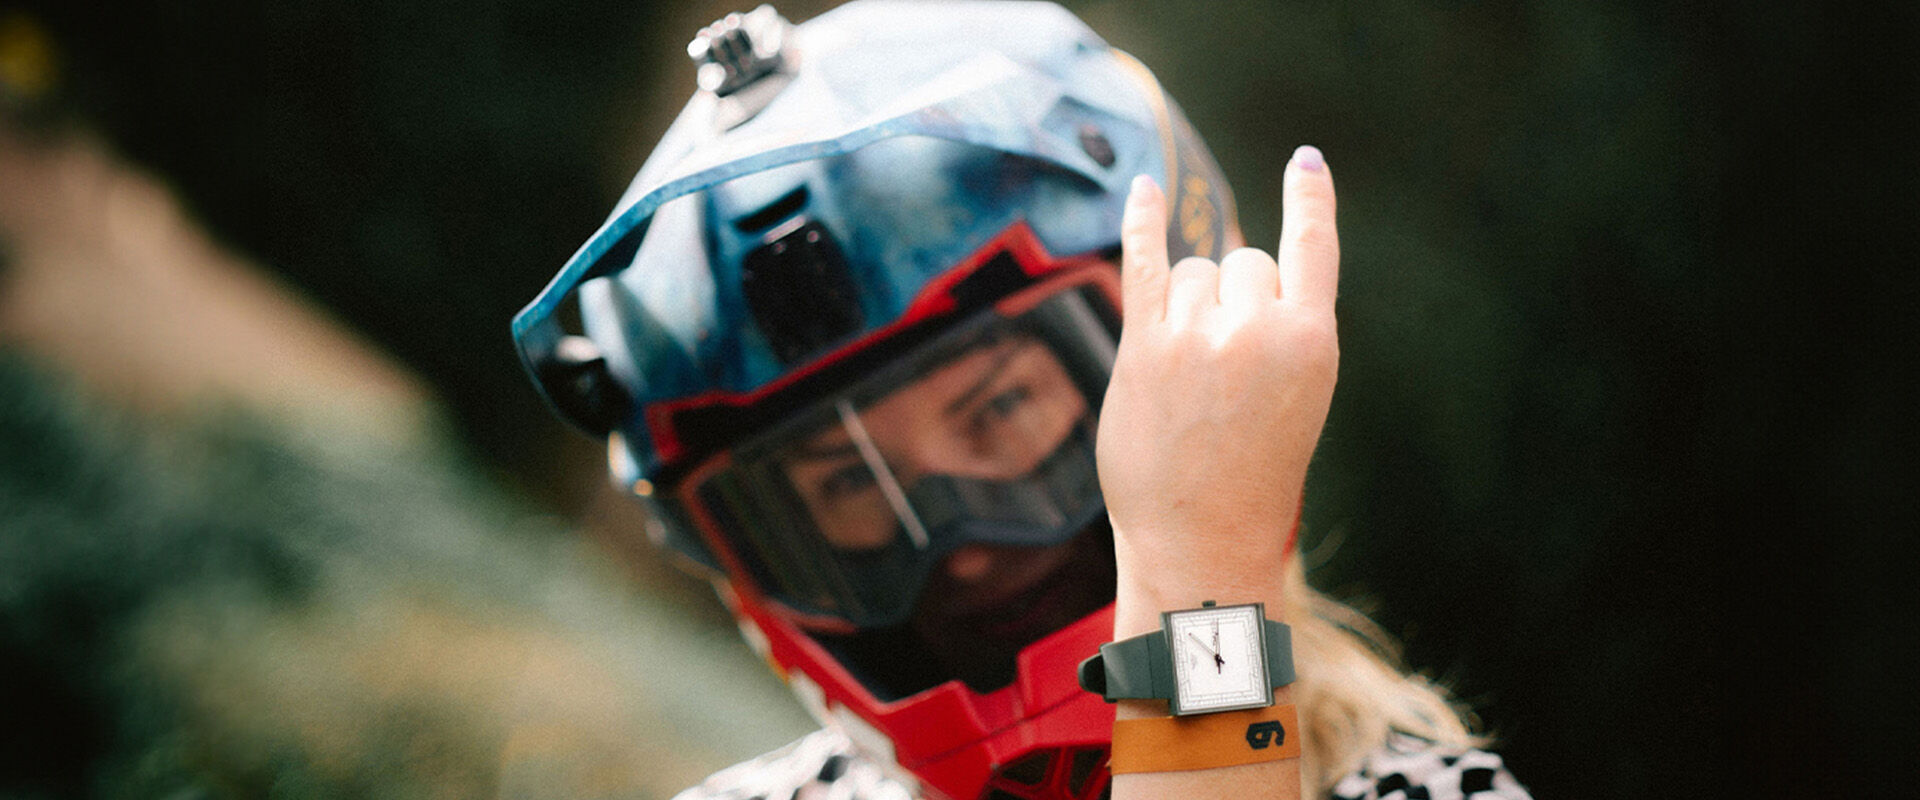 Proteam rider Casey Brown throwing up hand horns